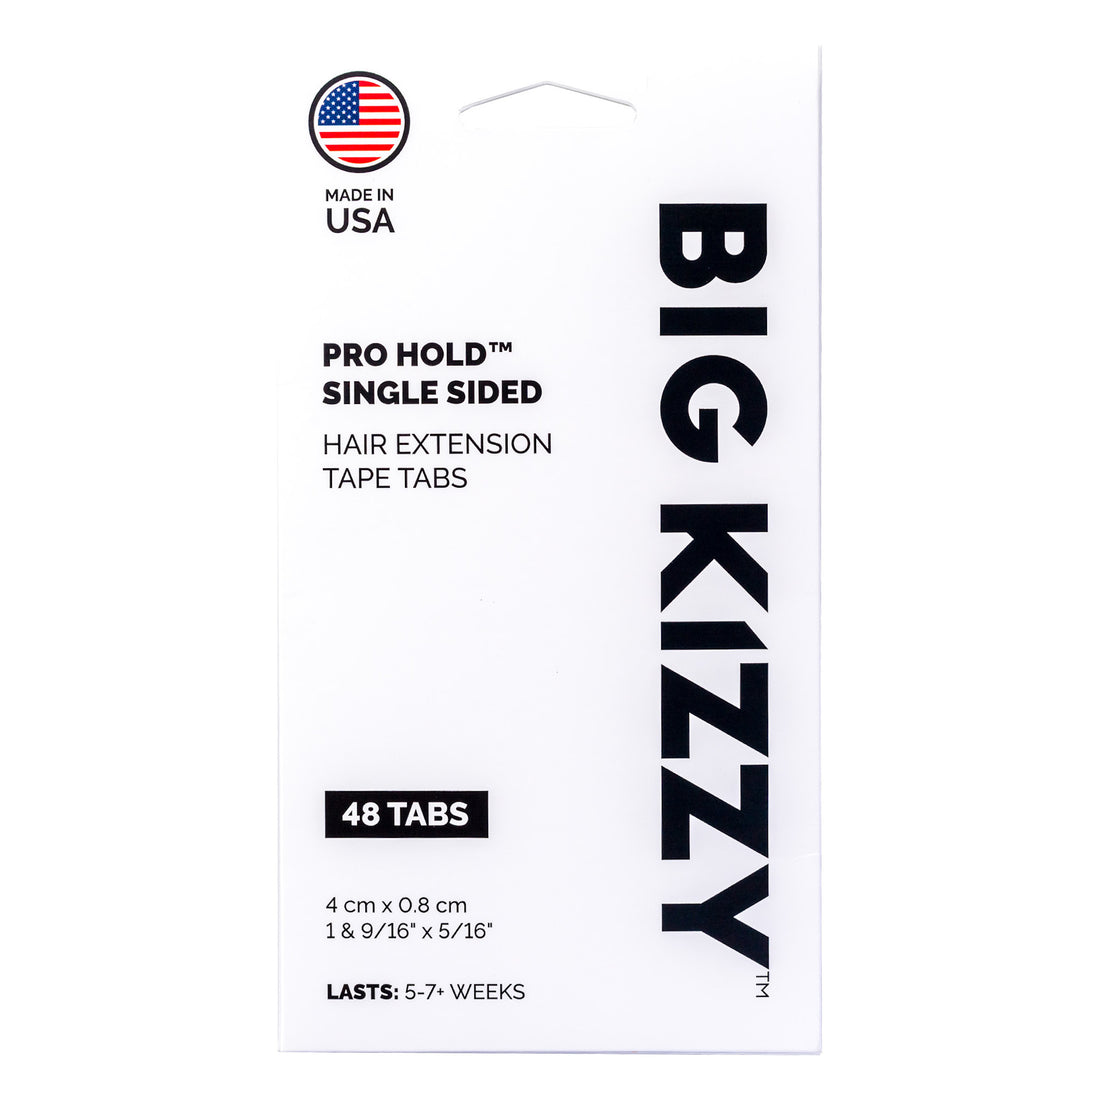 A pack of Big Kizzy® Pro Hold Single Sided Hair Extension Replacement Tape Tabs, 48 tabs